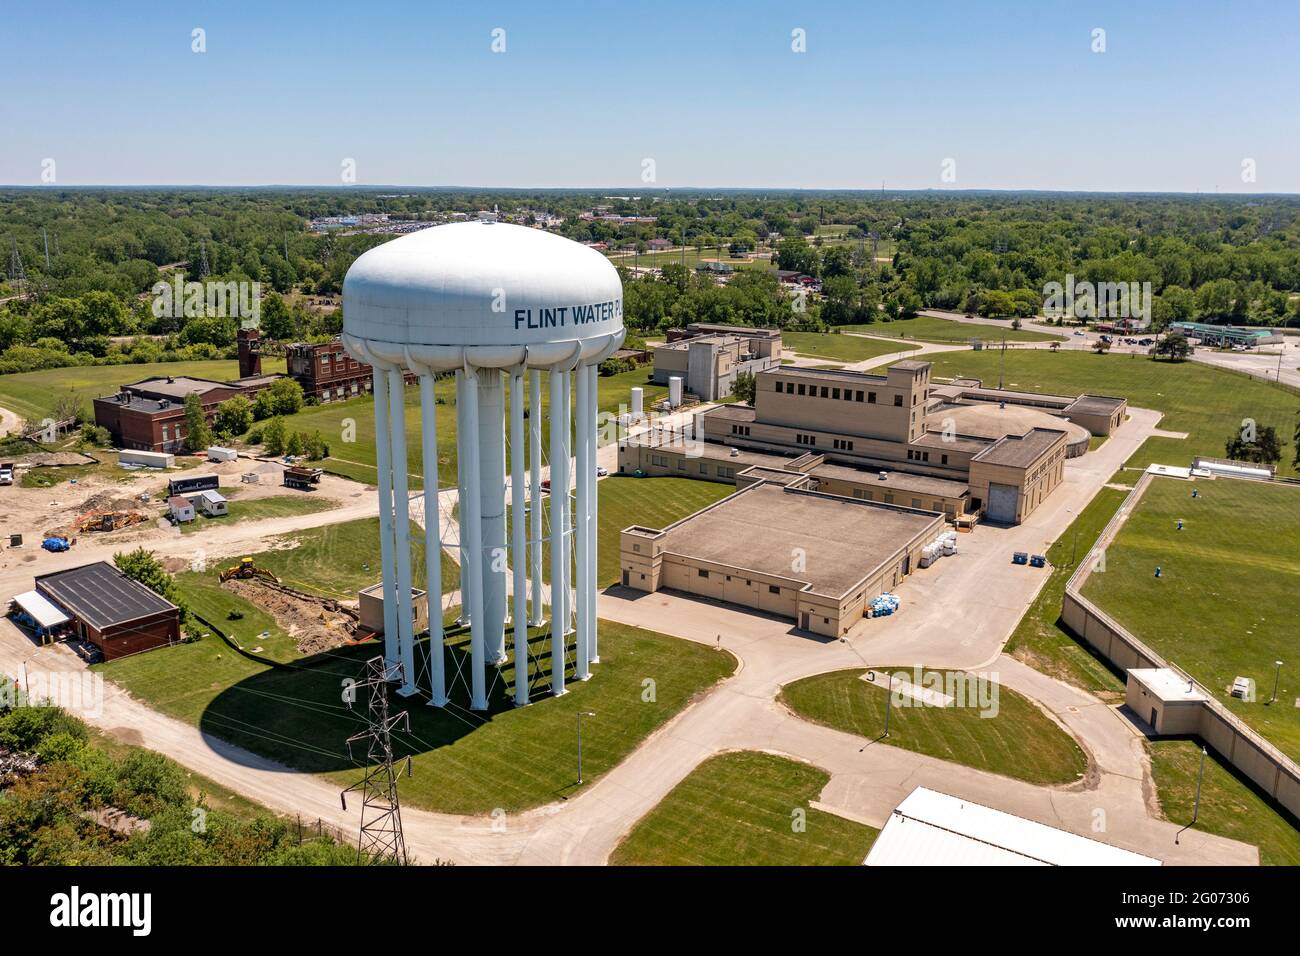 Flint, Michigan - The Flint Water Plant. Thousands of children were exposed to harmful concentrations of lead after the city's water supply was contam Stock Photo